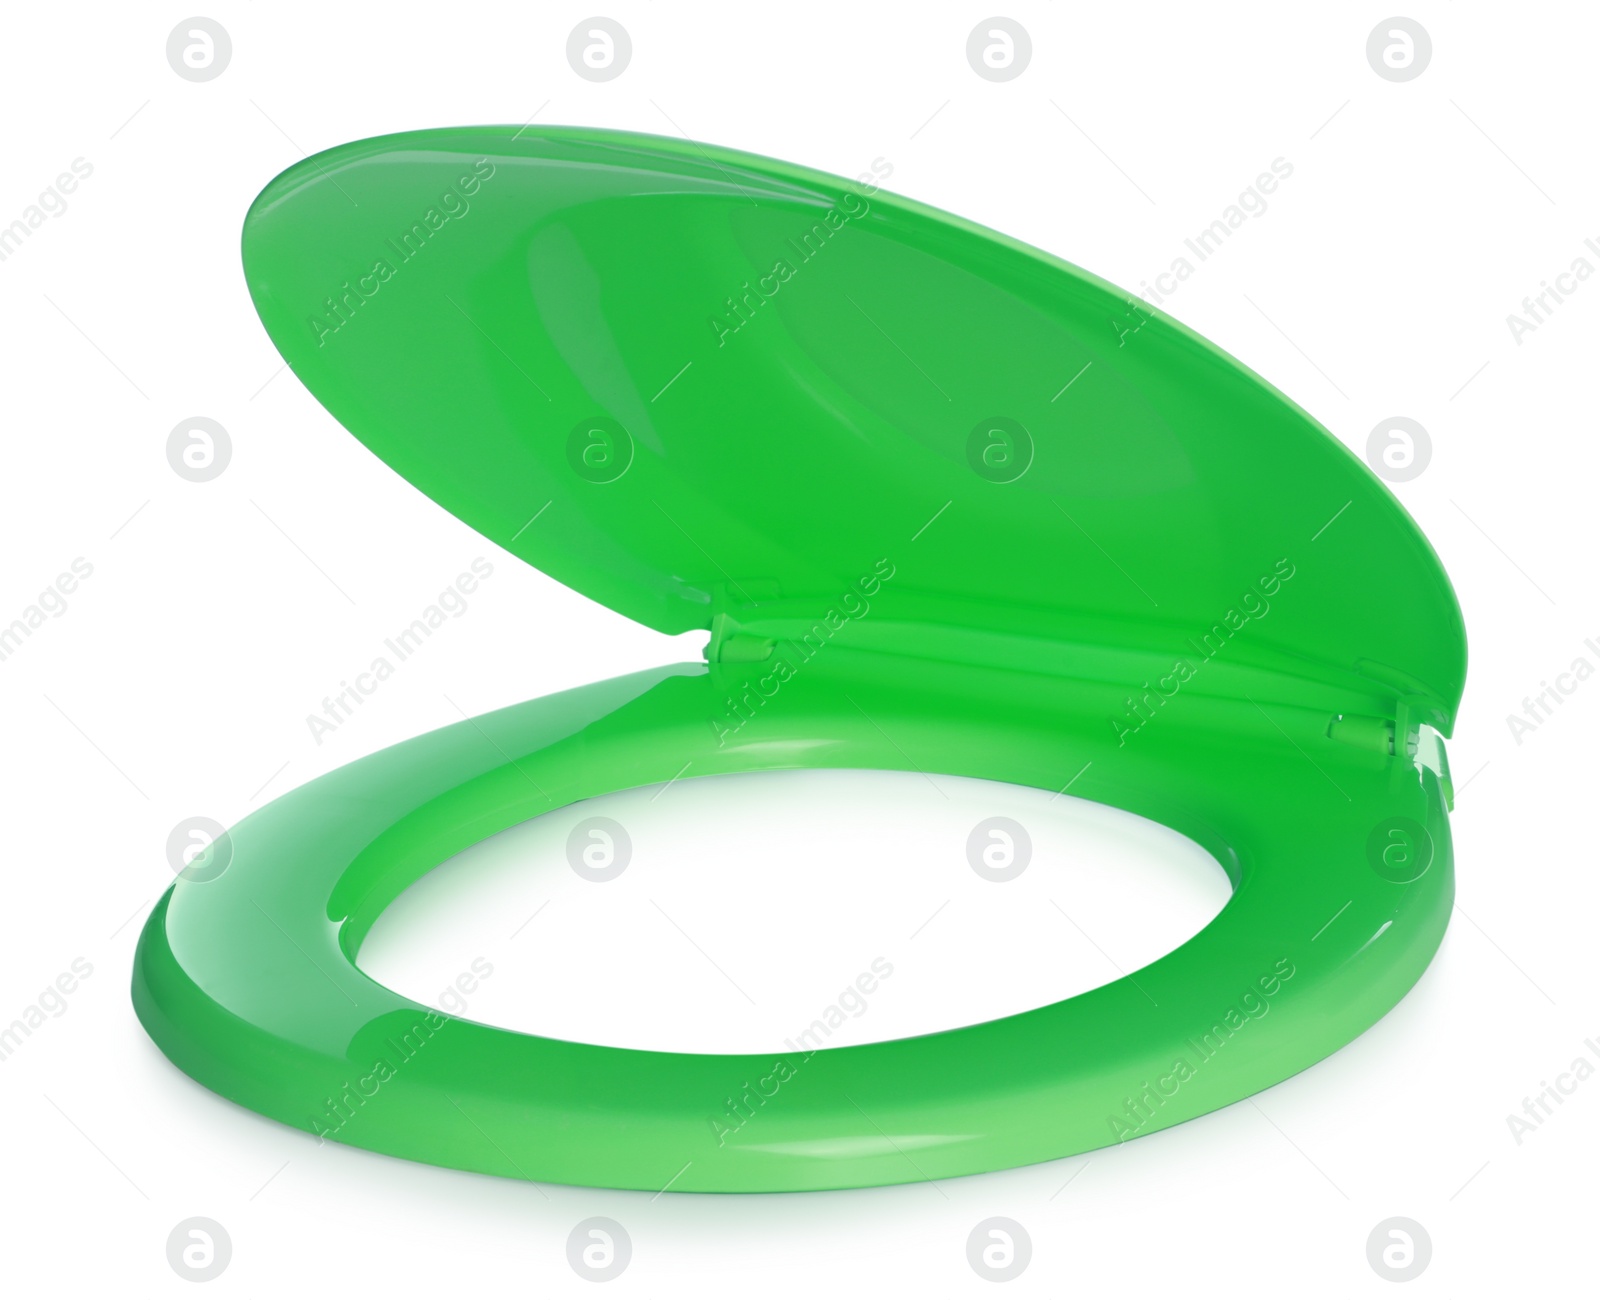 Photo of New green plastic toilet seat isolated on white